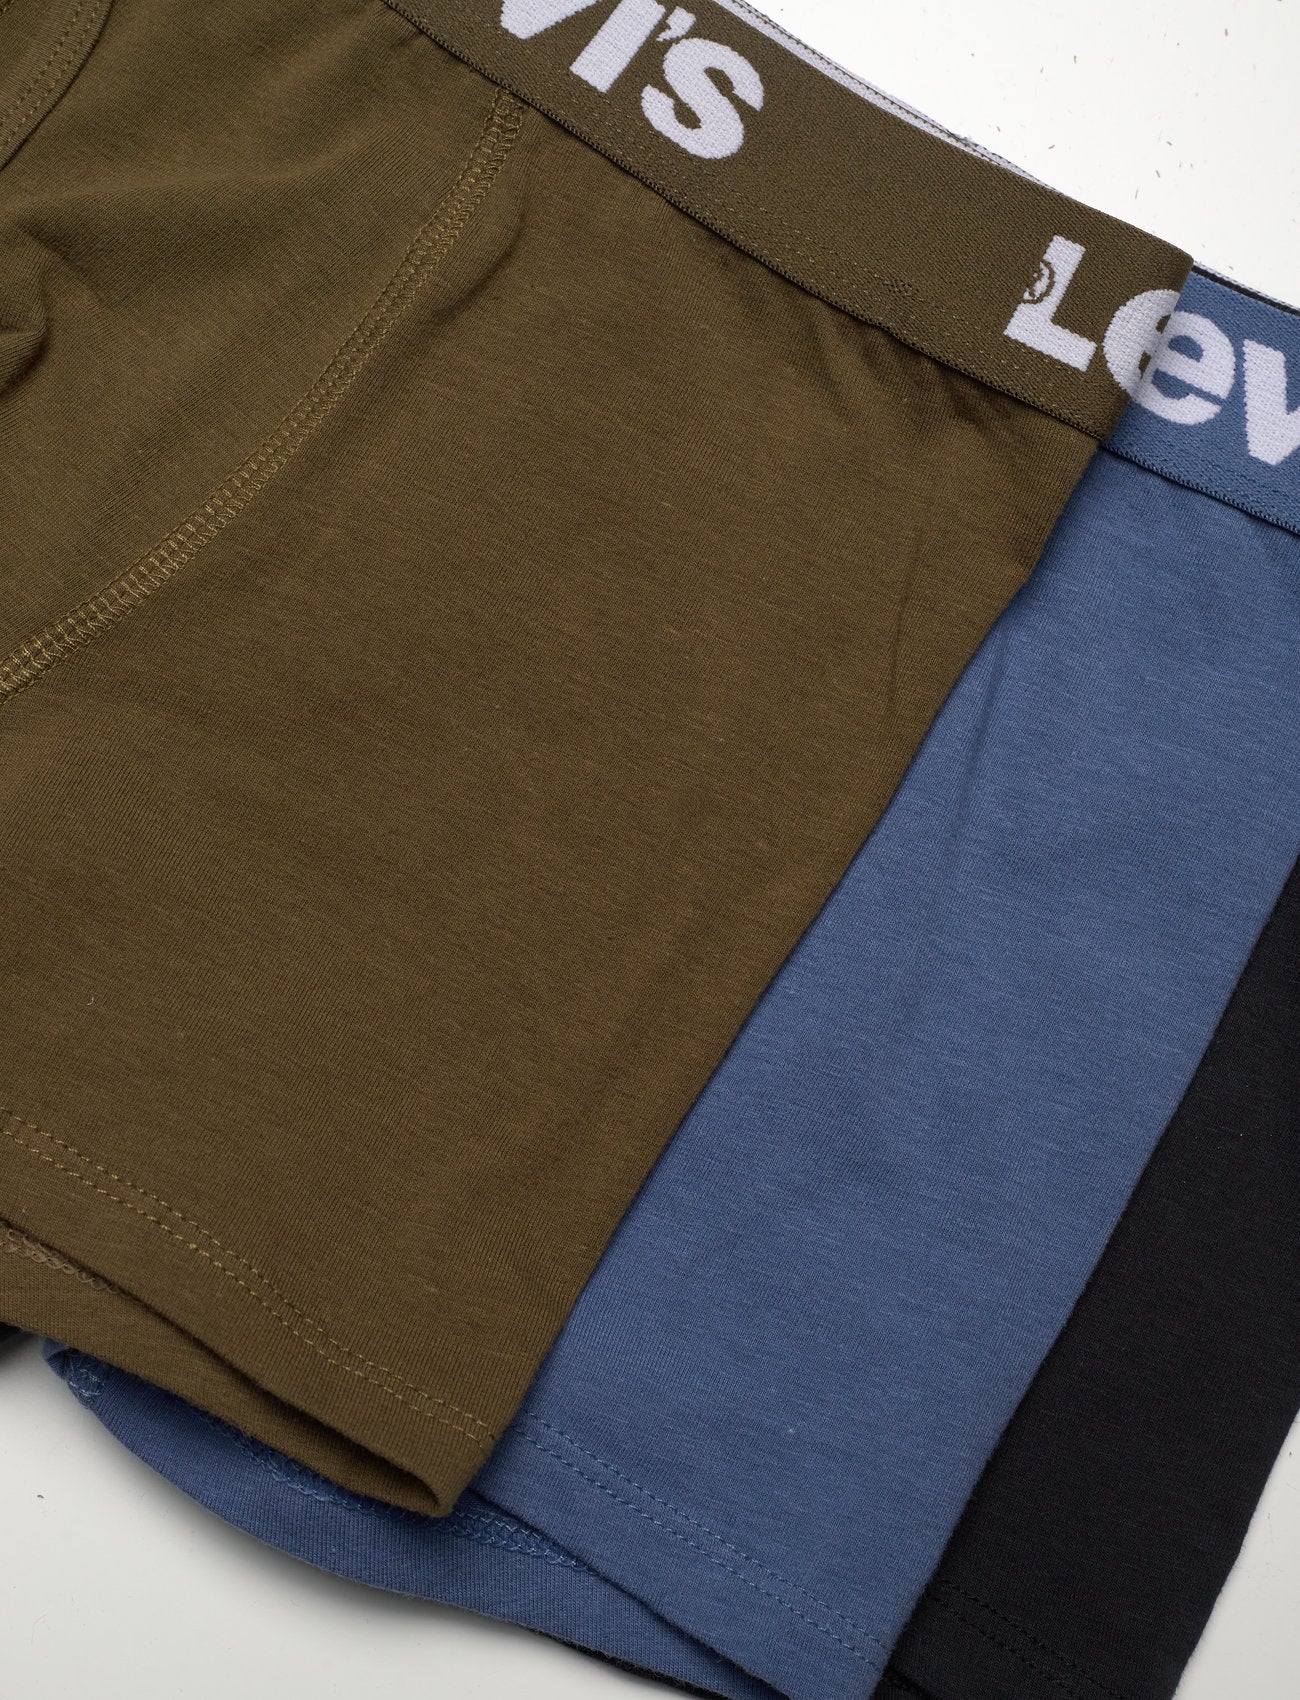 L-e-v-i-s pack of 3 boxers ( combed cotton ).